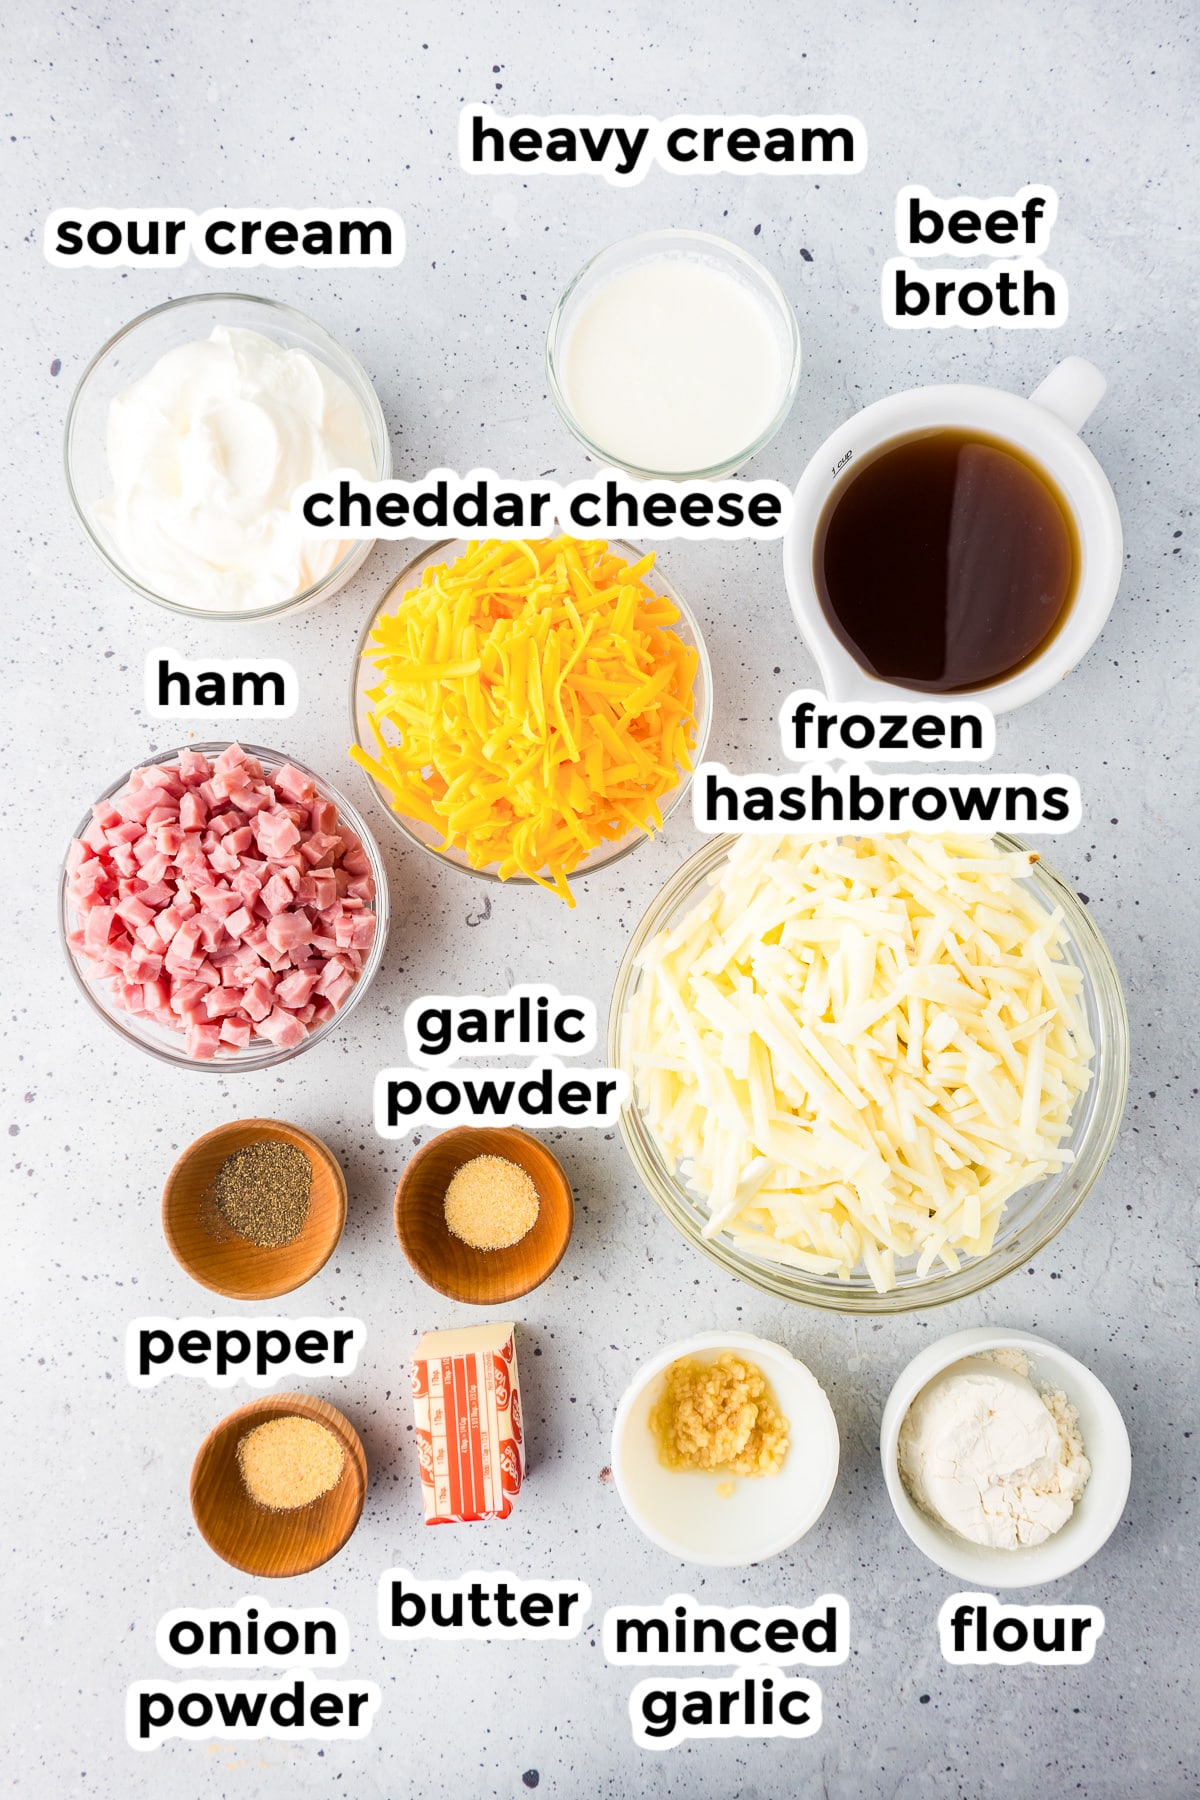 Ingredients for a potato soup recipe neatly labeled and arranged on a kitchen counter.